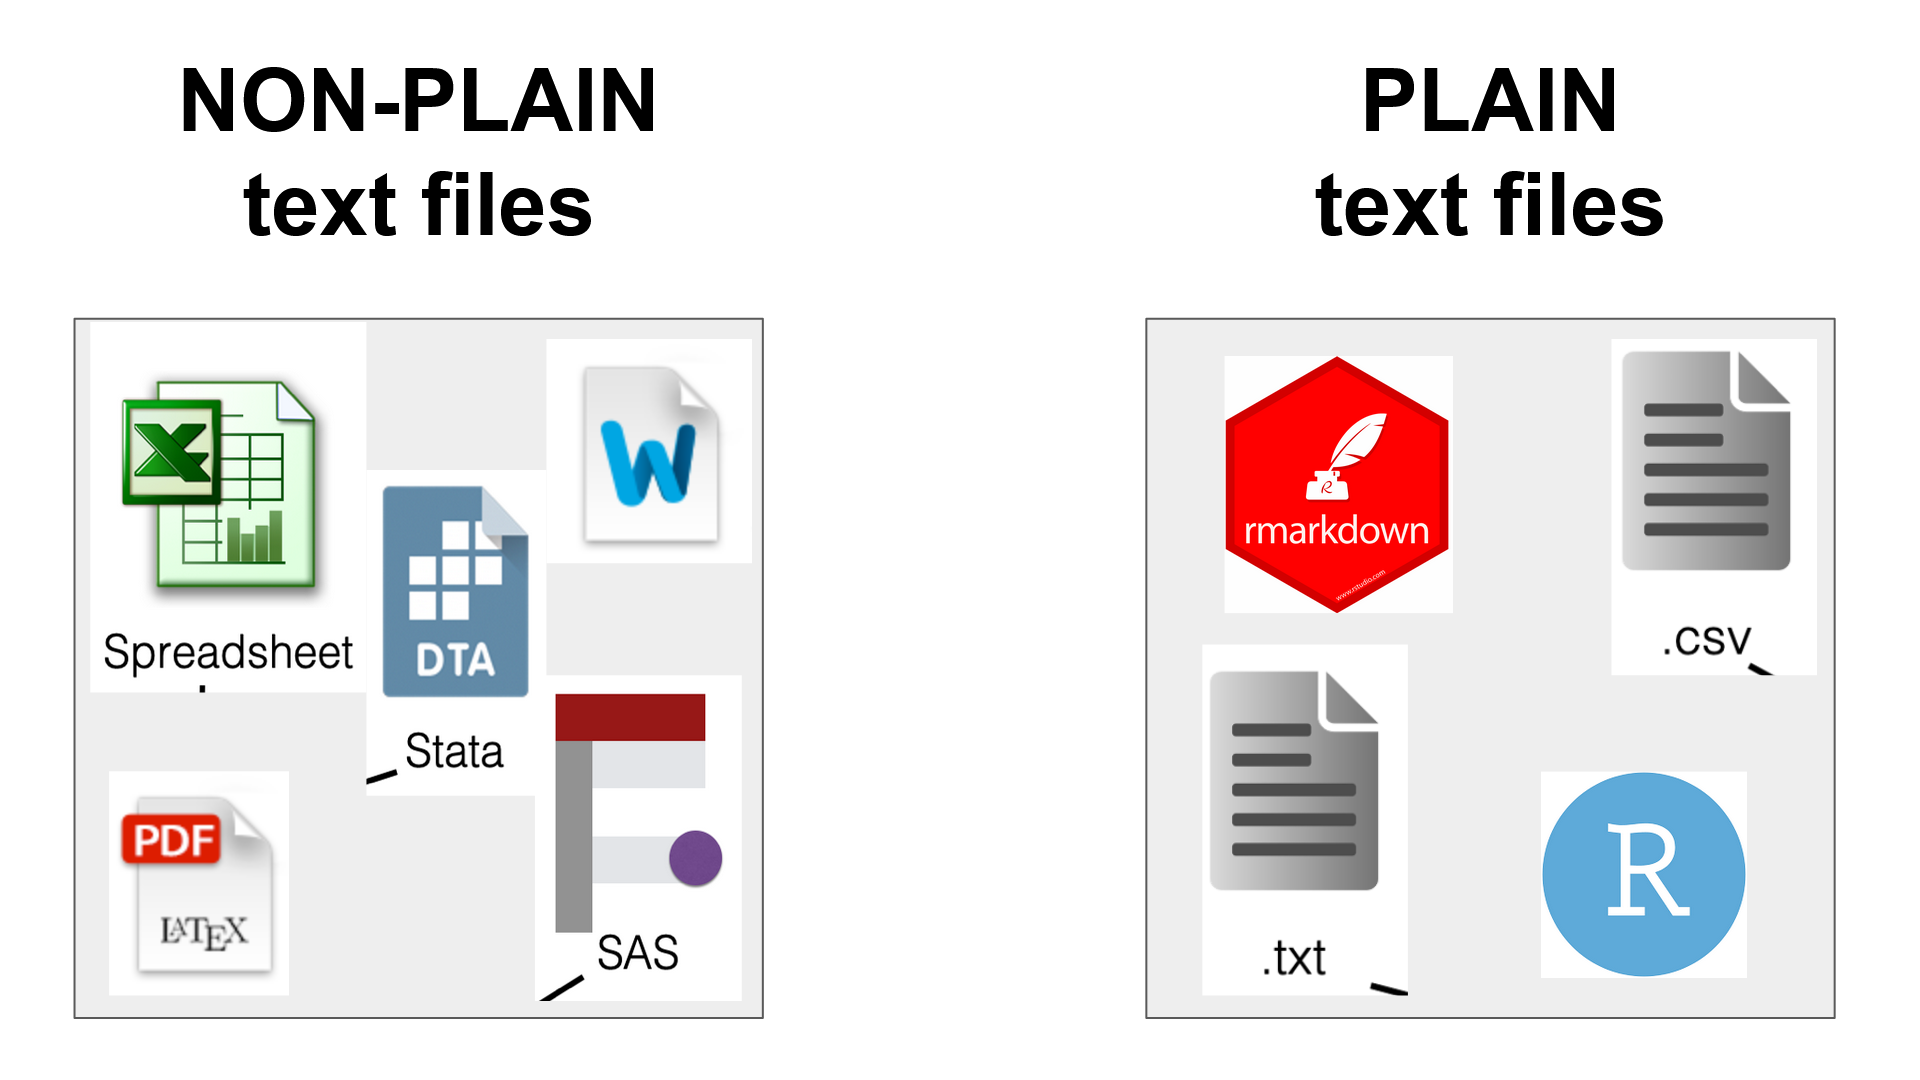 Examples of non-plain and plain text files.